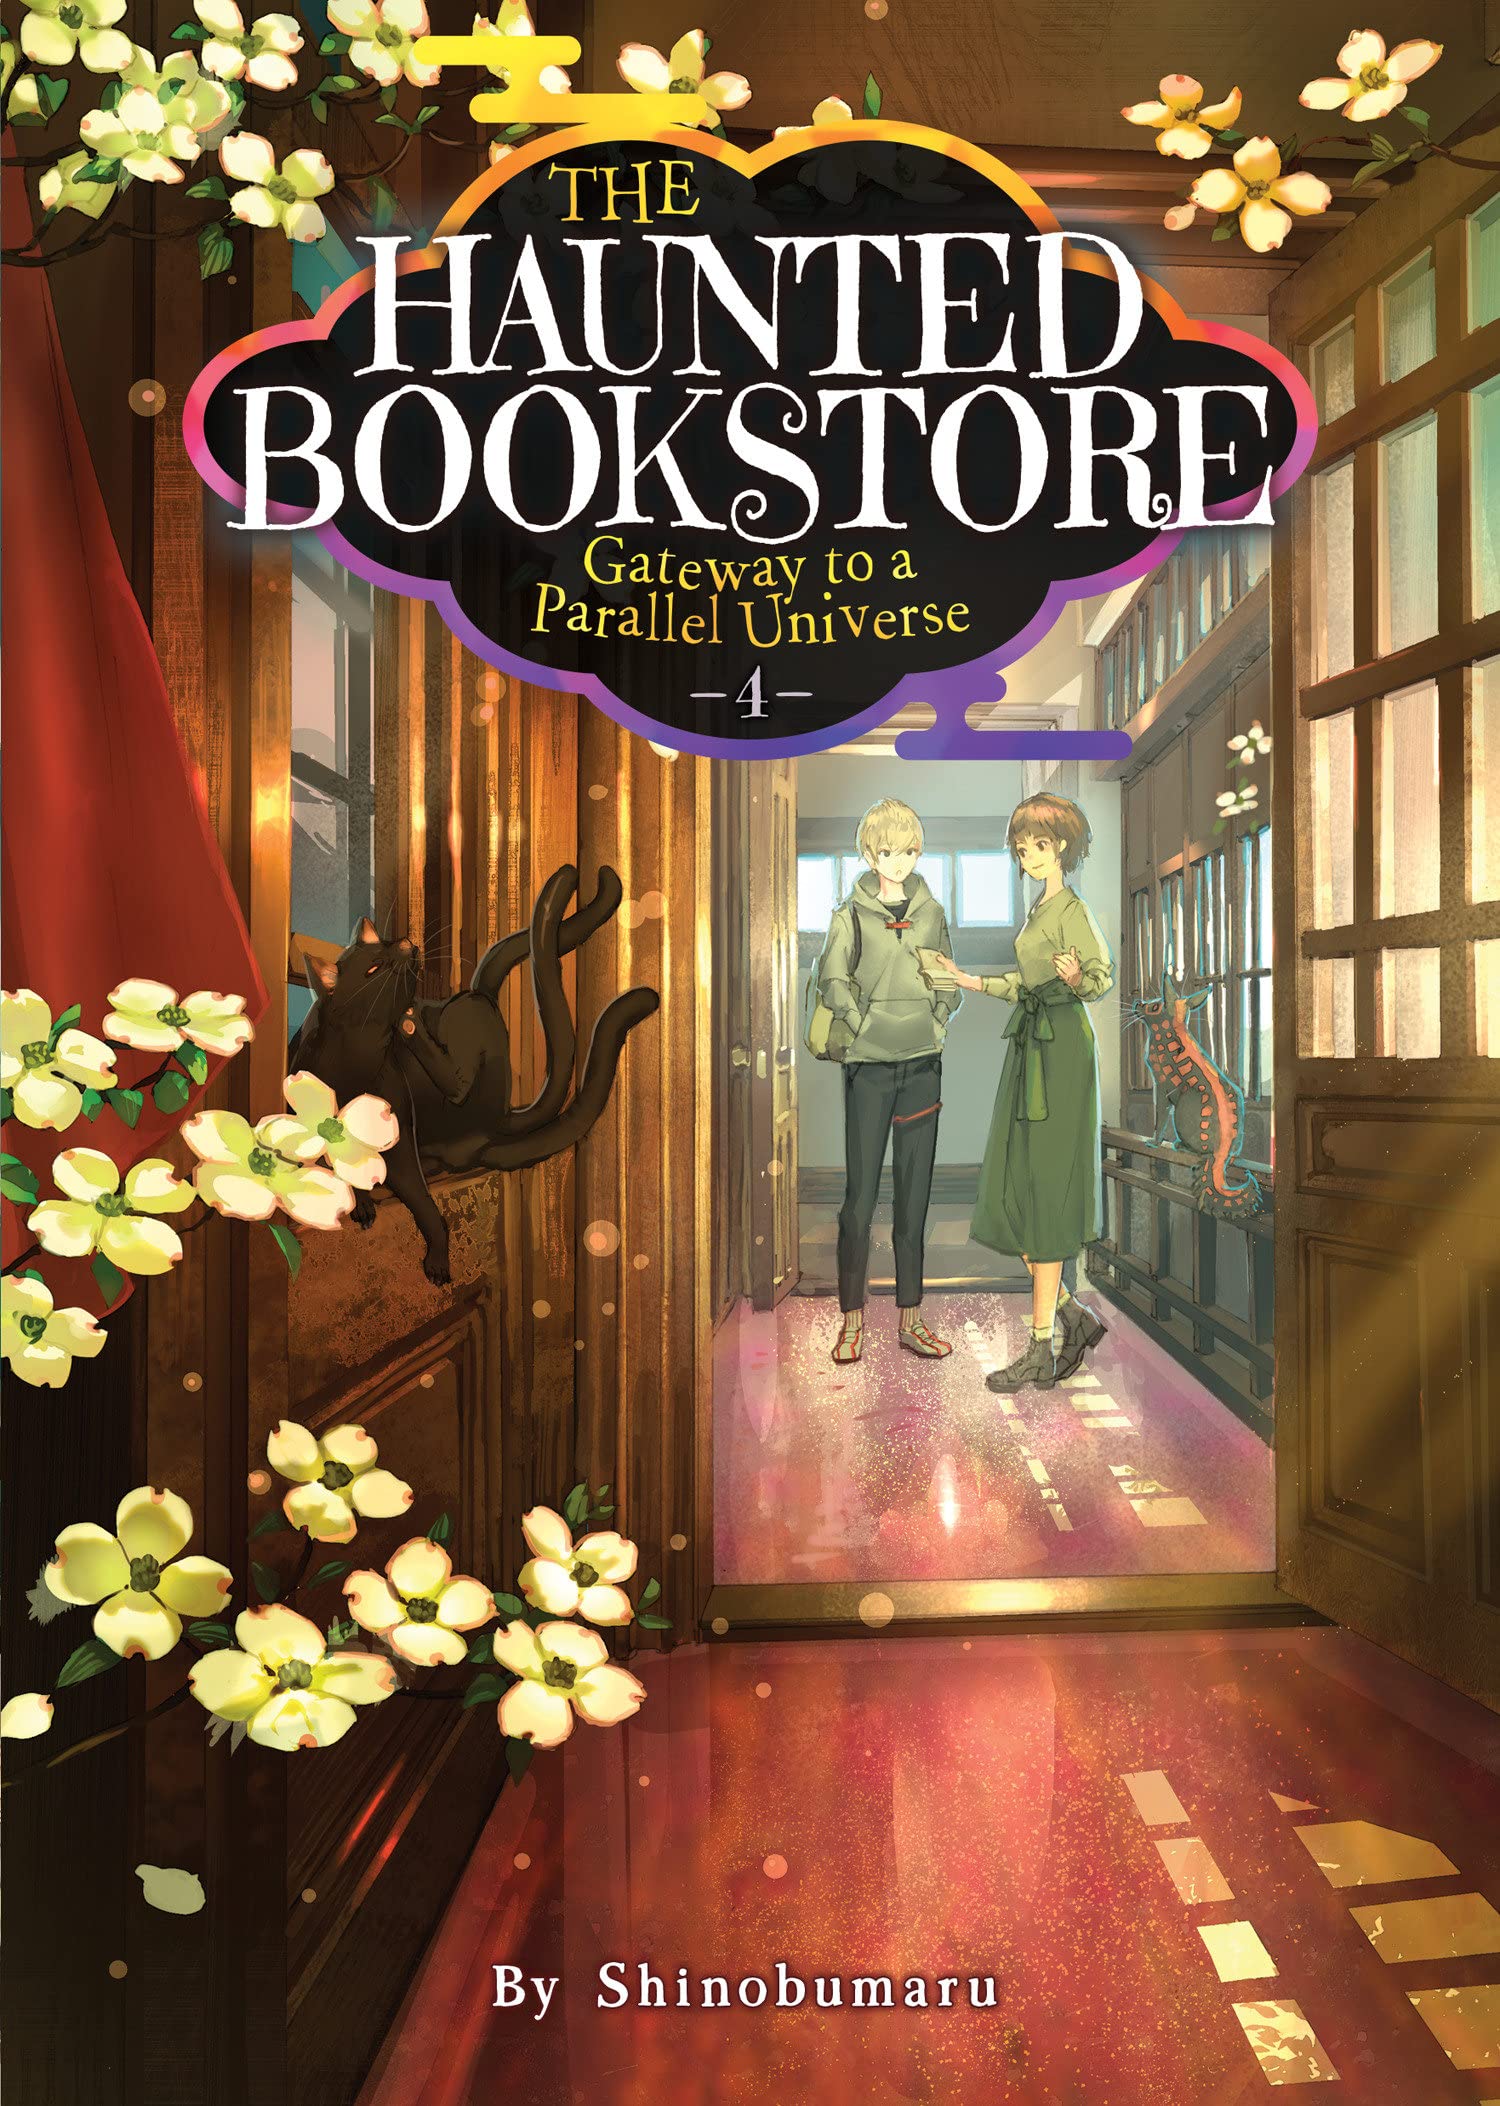 The Haunted Bookstore - Gateway to a Parallel Universe (Light Novel) Vol. 04